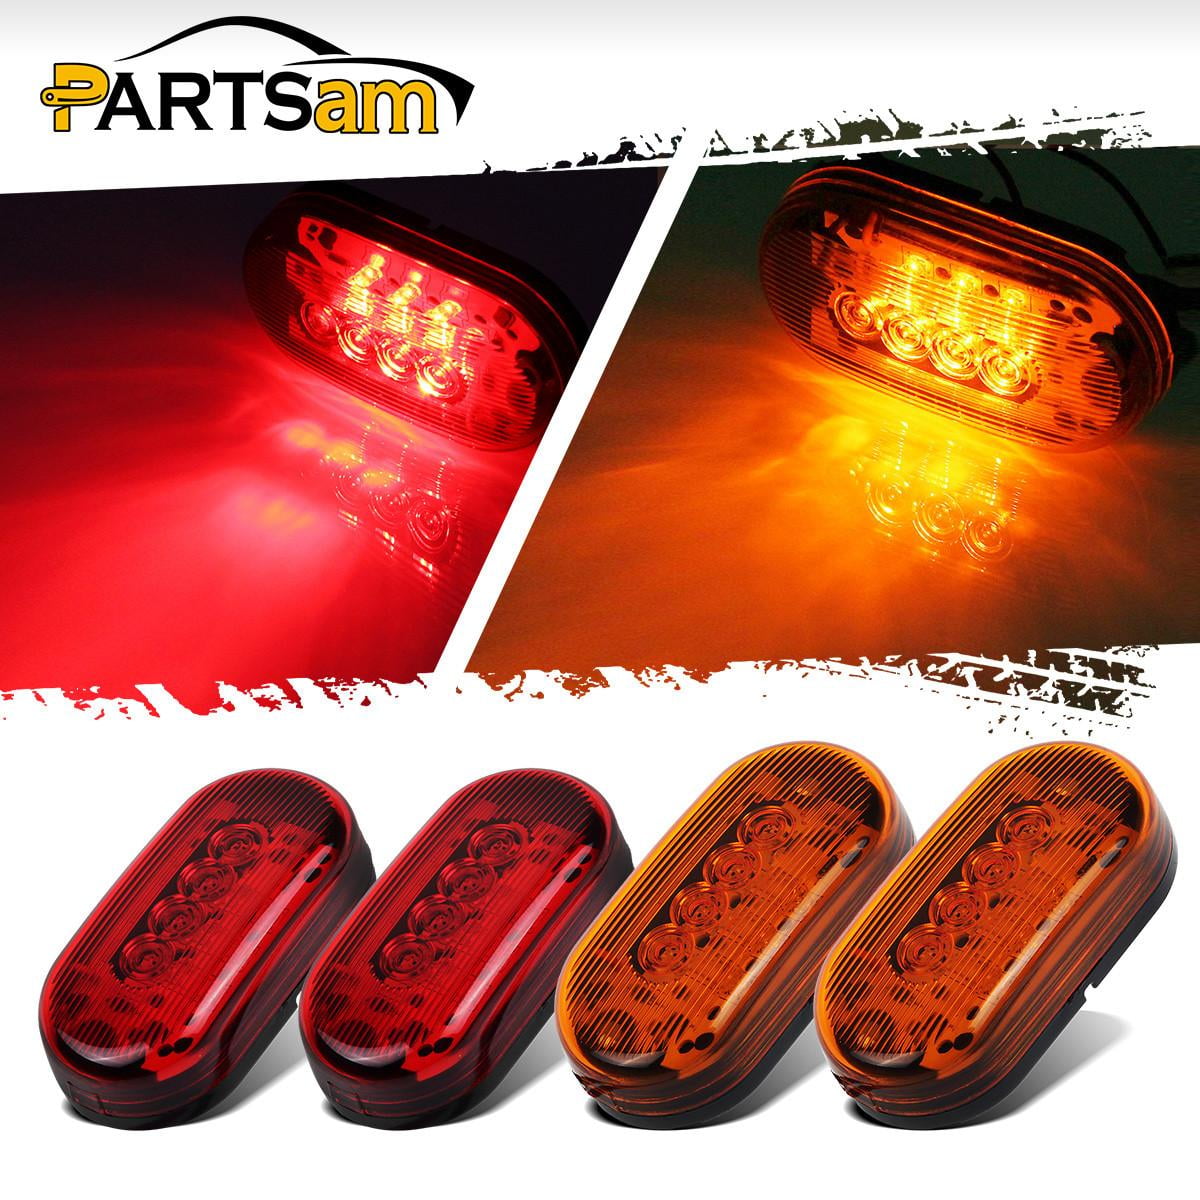 Camper Utility Van Truck Partsam 10 Pcs Universal Clear/Red Side Marker Trailer Light Surface Mount 2 Diodes Lorry Sealed Mini Led Marker Clearance or Identification Lights 